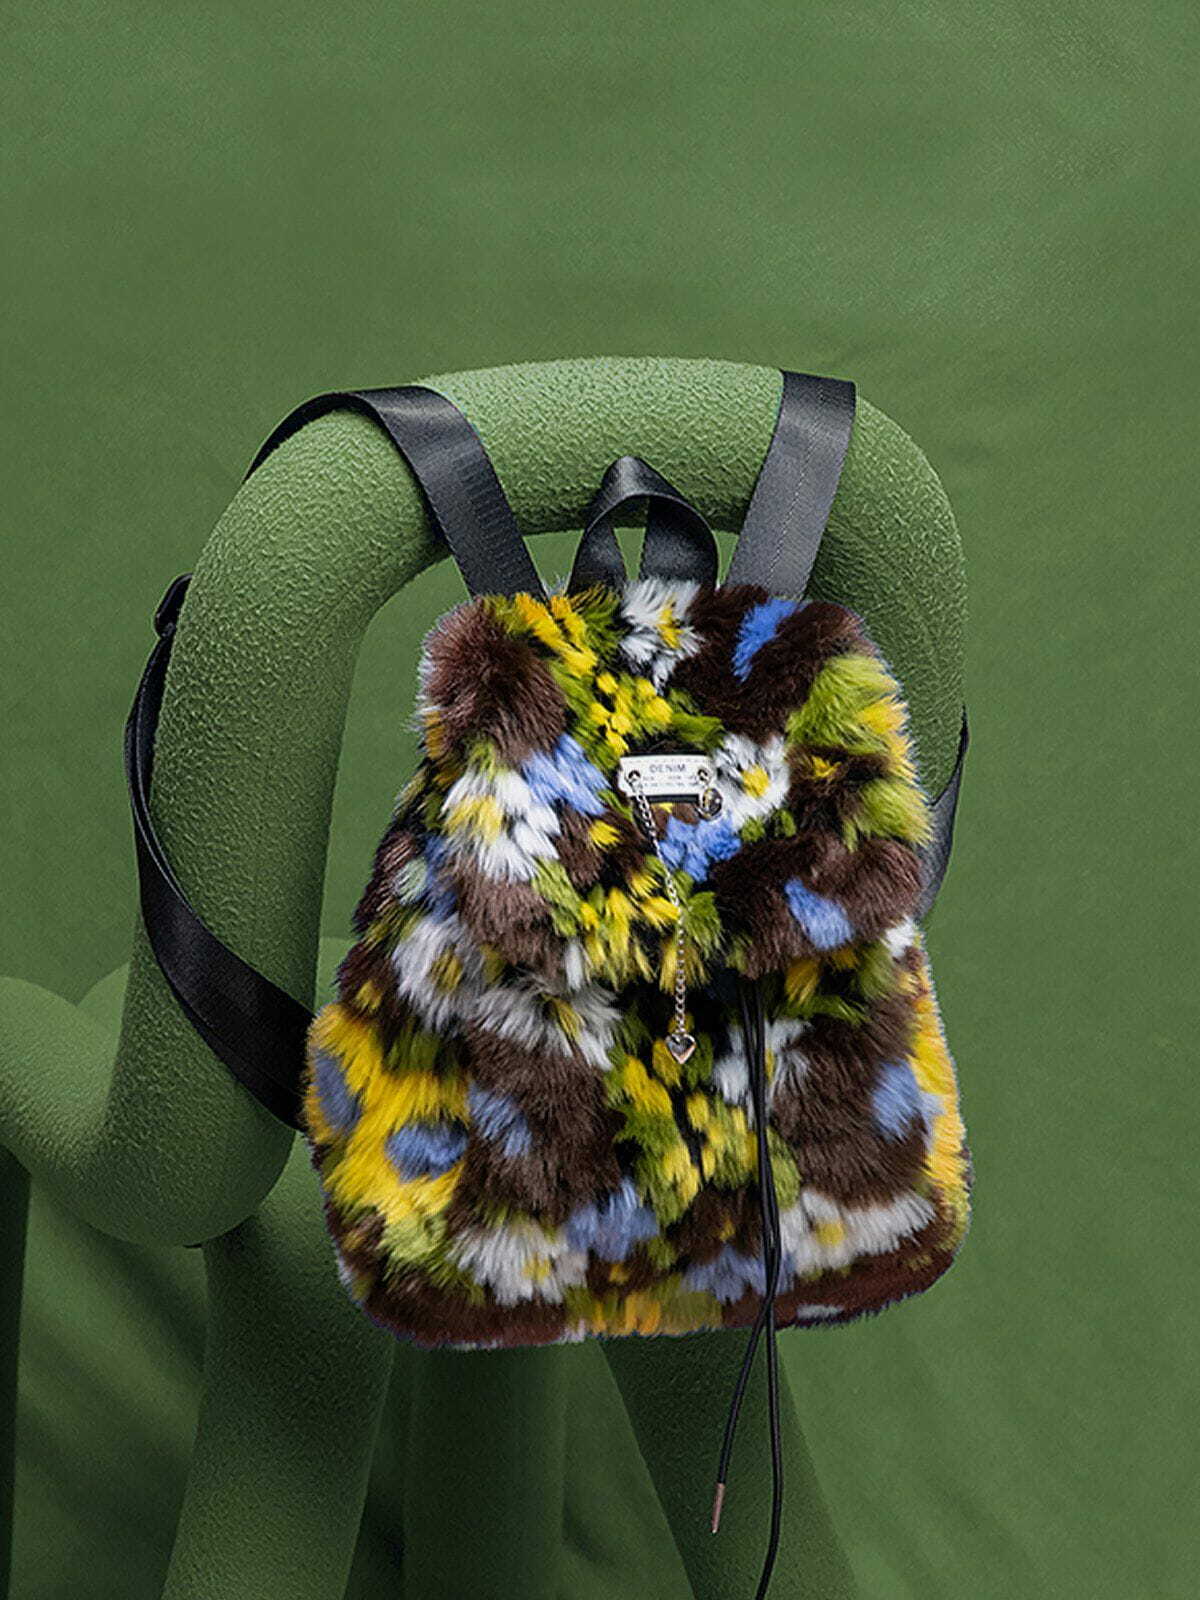 fleece flower backpack quirky & stylish urban accessory 3148